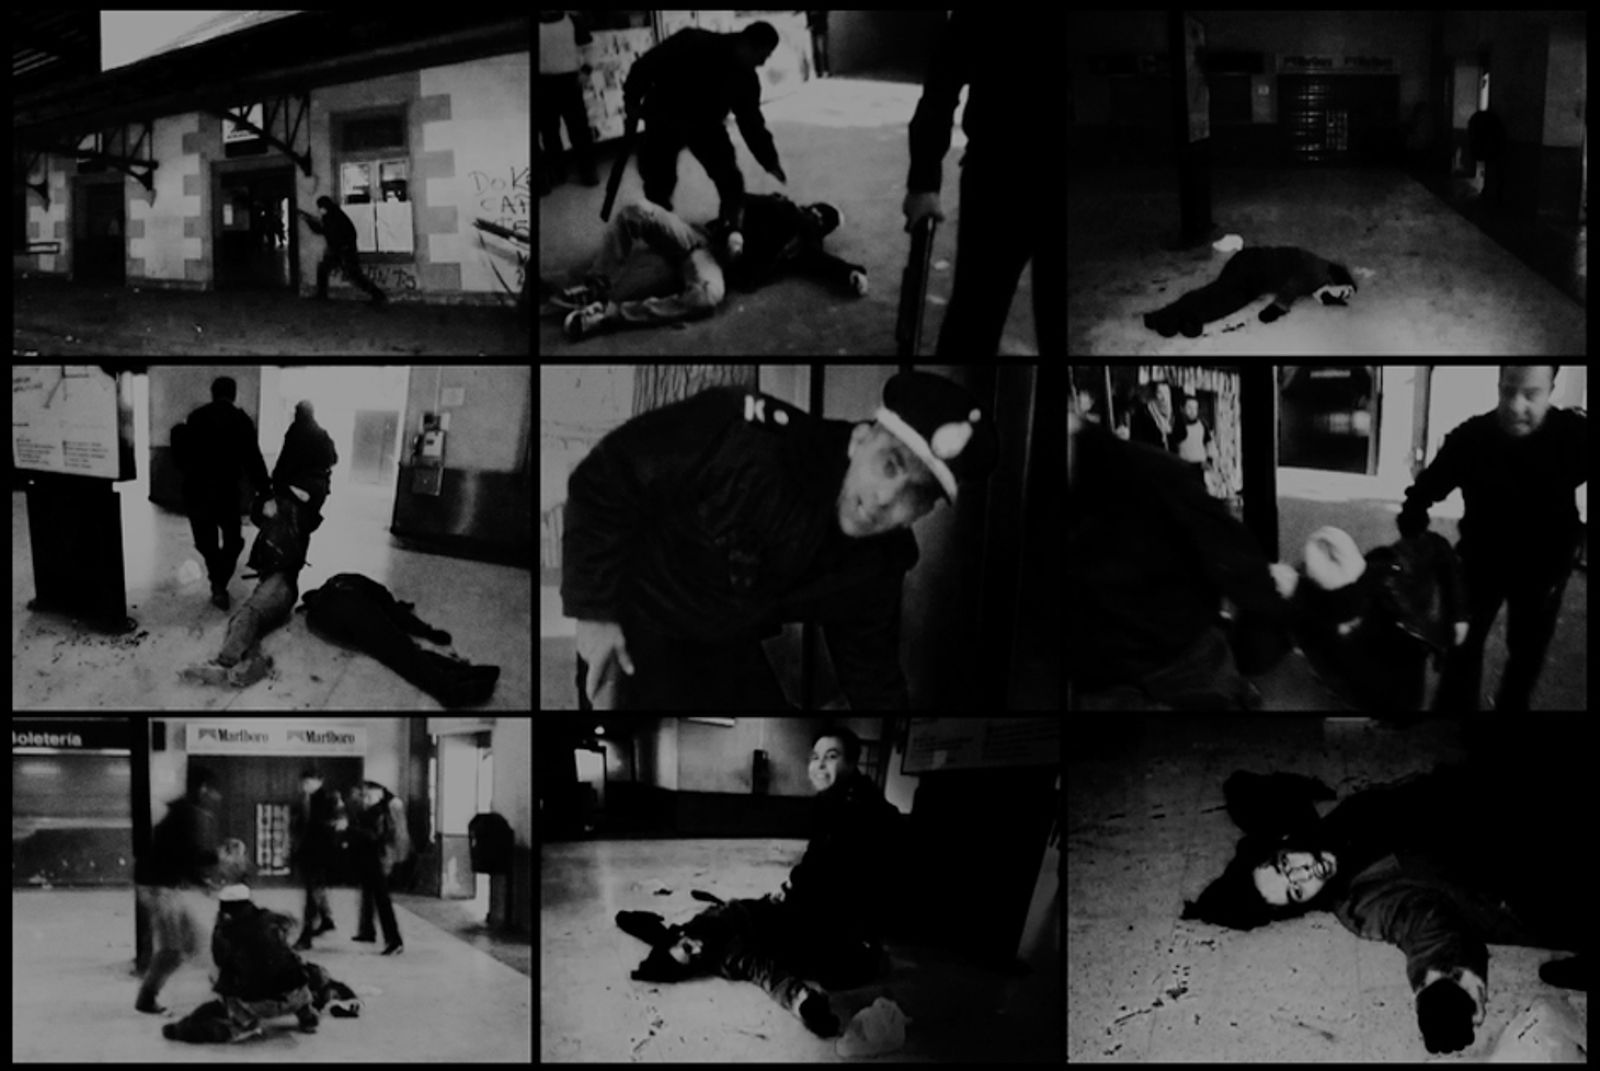 © Myriam Meloni - Frames of the videos which allowed to identify those policemen responsible for the murders of Dario and Maxi.